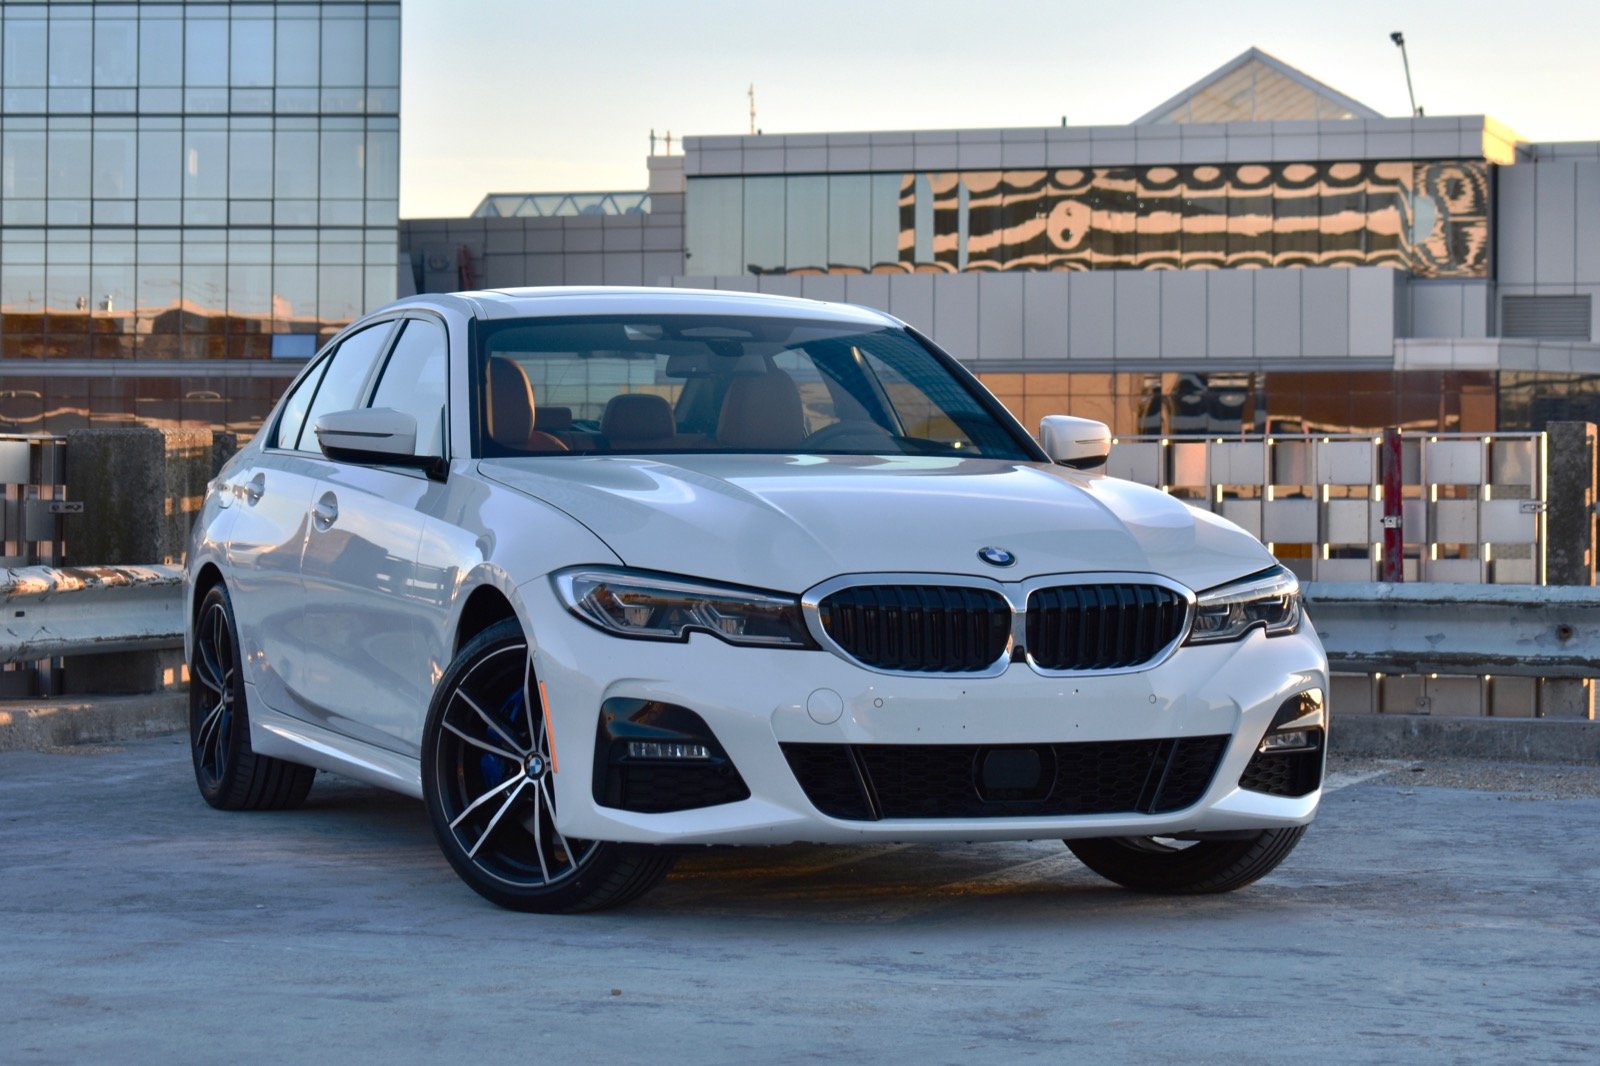 2021 BMW 3 Series: Prices, Reviews & Pictures - CarGurus